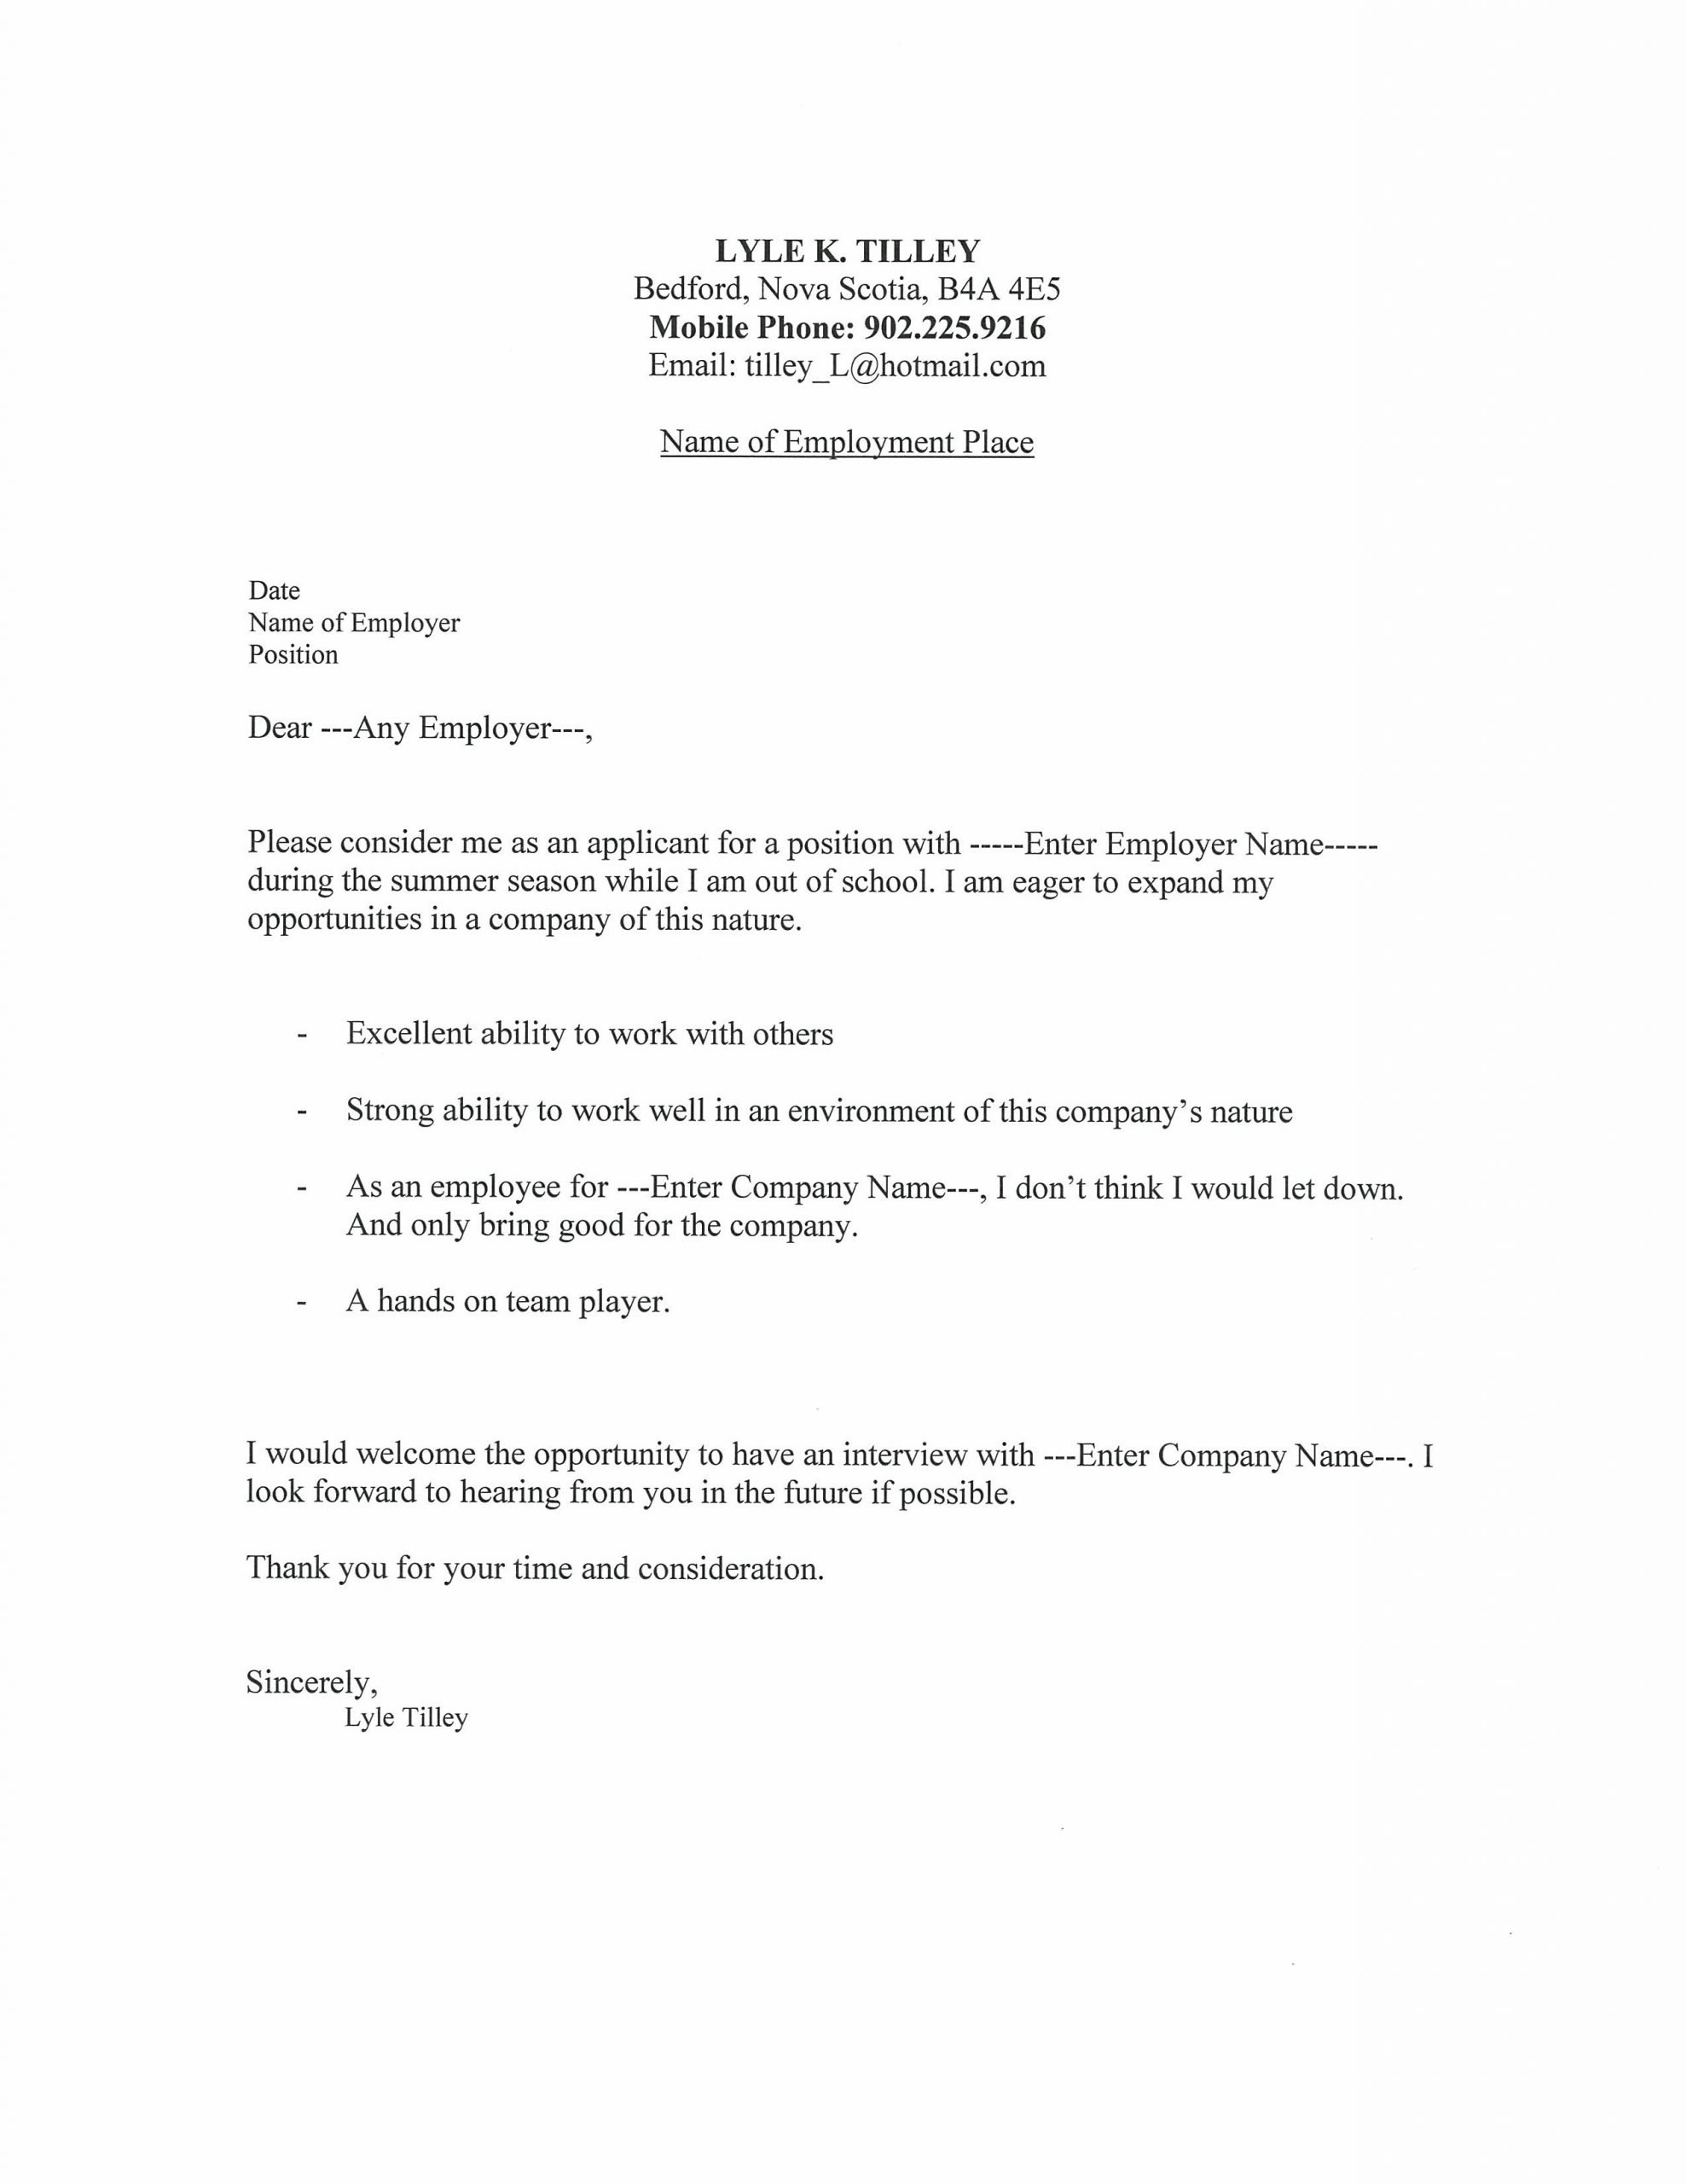 Tips on How to Write a Great Cover Letter for Resume